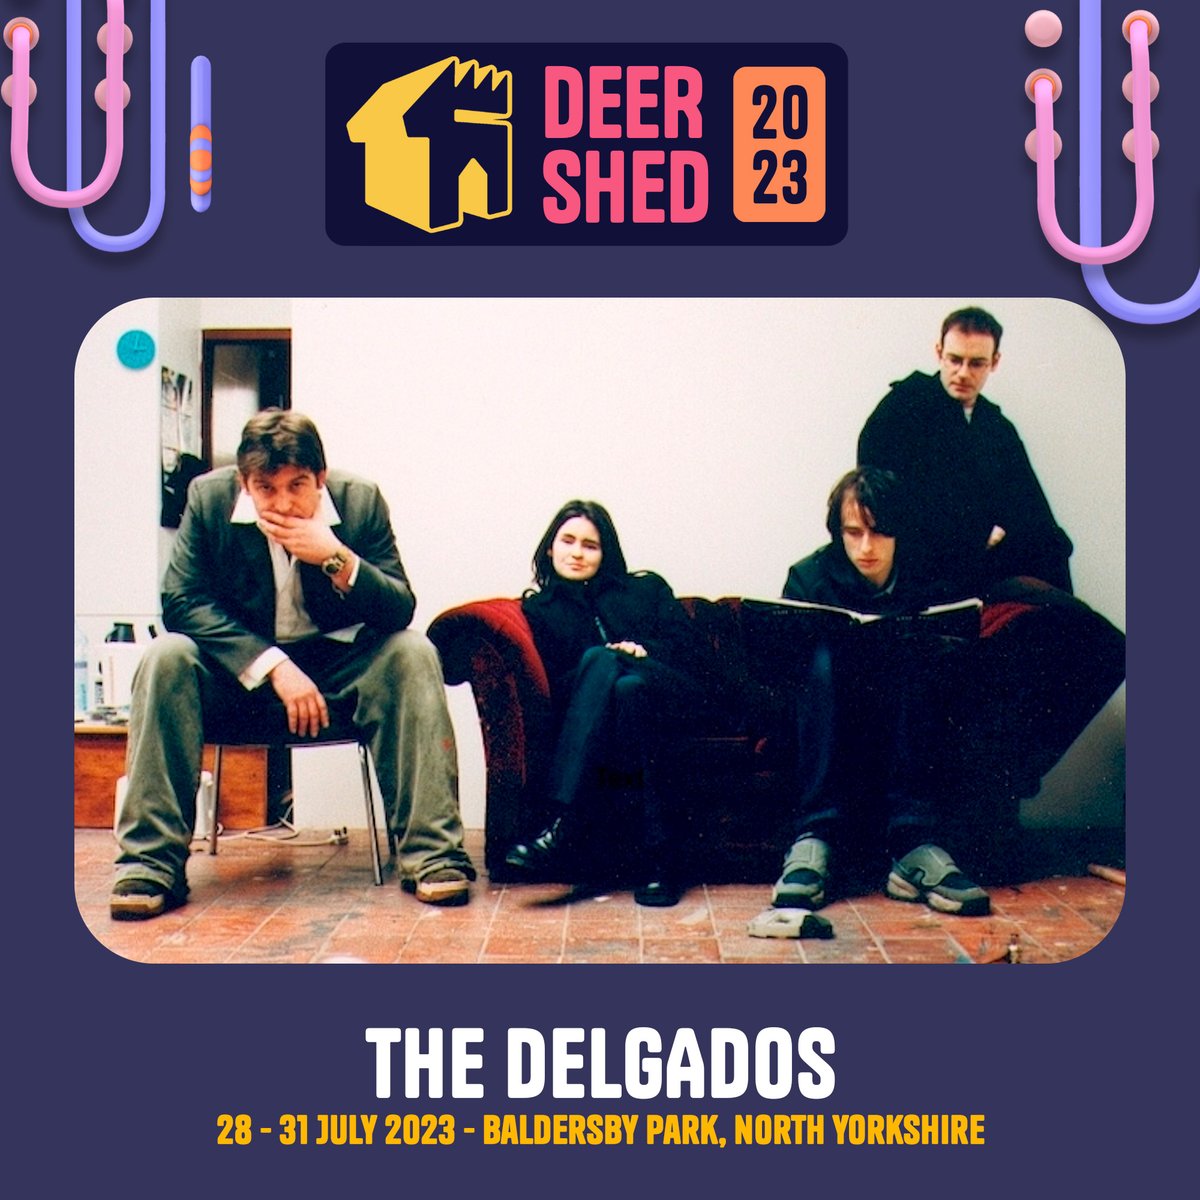 This photo is admittedly a bit out of date given that it was taken back in 2000 when The Great Eastern was released, but the 20+ years on version of us will definitely be there at @DeerShed Festival on Sunday night and I for one cannot wait... 😍